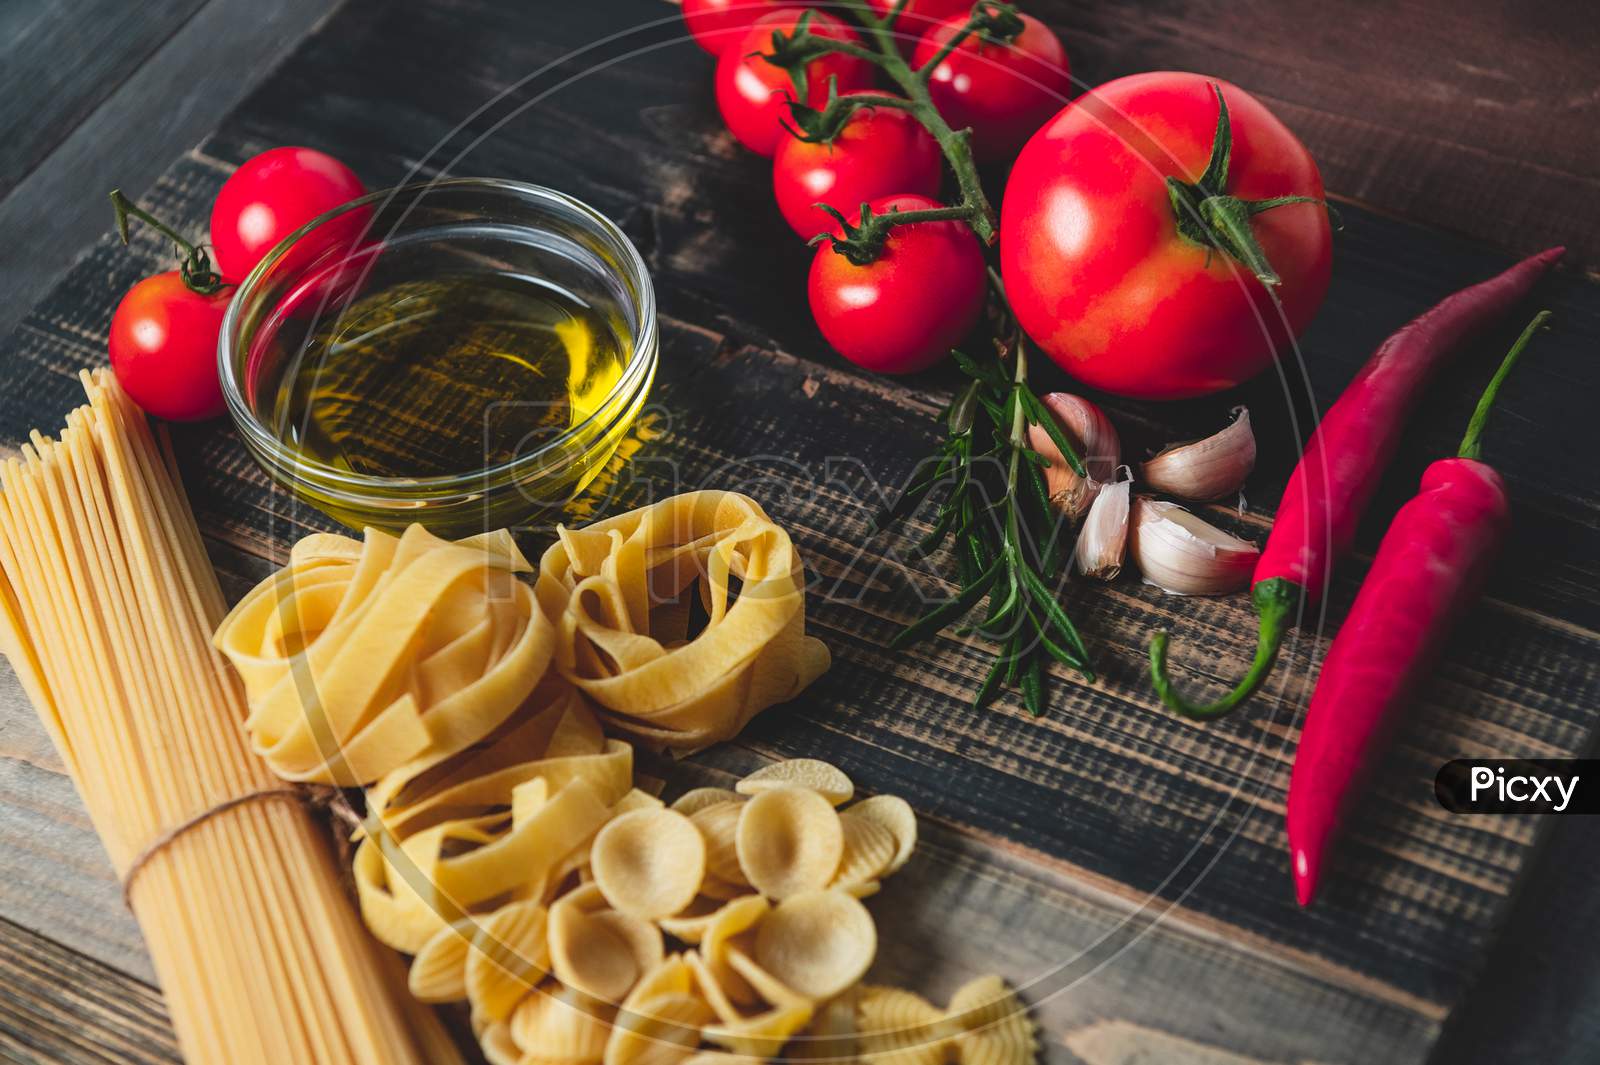 Tasty Appetizing Italian Spaghetti Pasta Ingredients For Kitchen Cuisine With Tomato, Cheese Parmesan, Olive Oil, Fettuccine And Basil On Wooden Brown Table. Food Italian Recipe Homemade. Top View